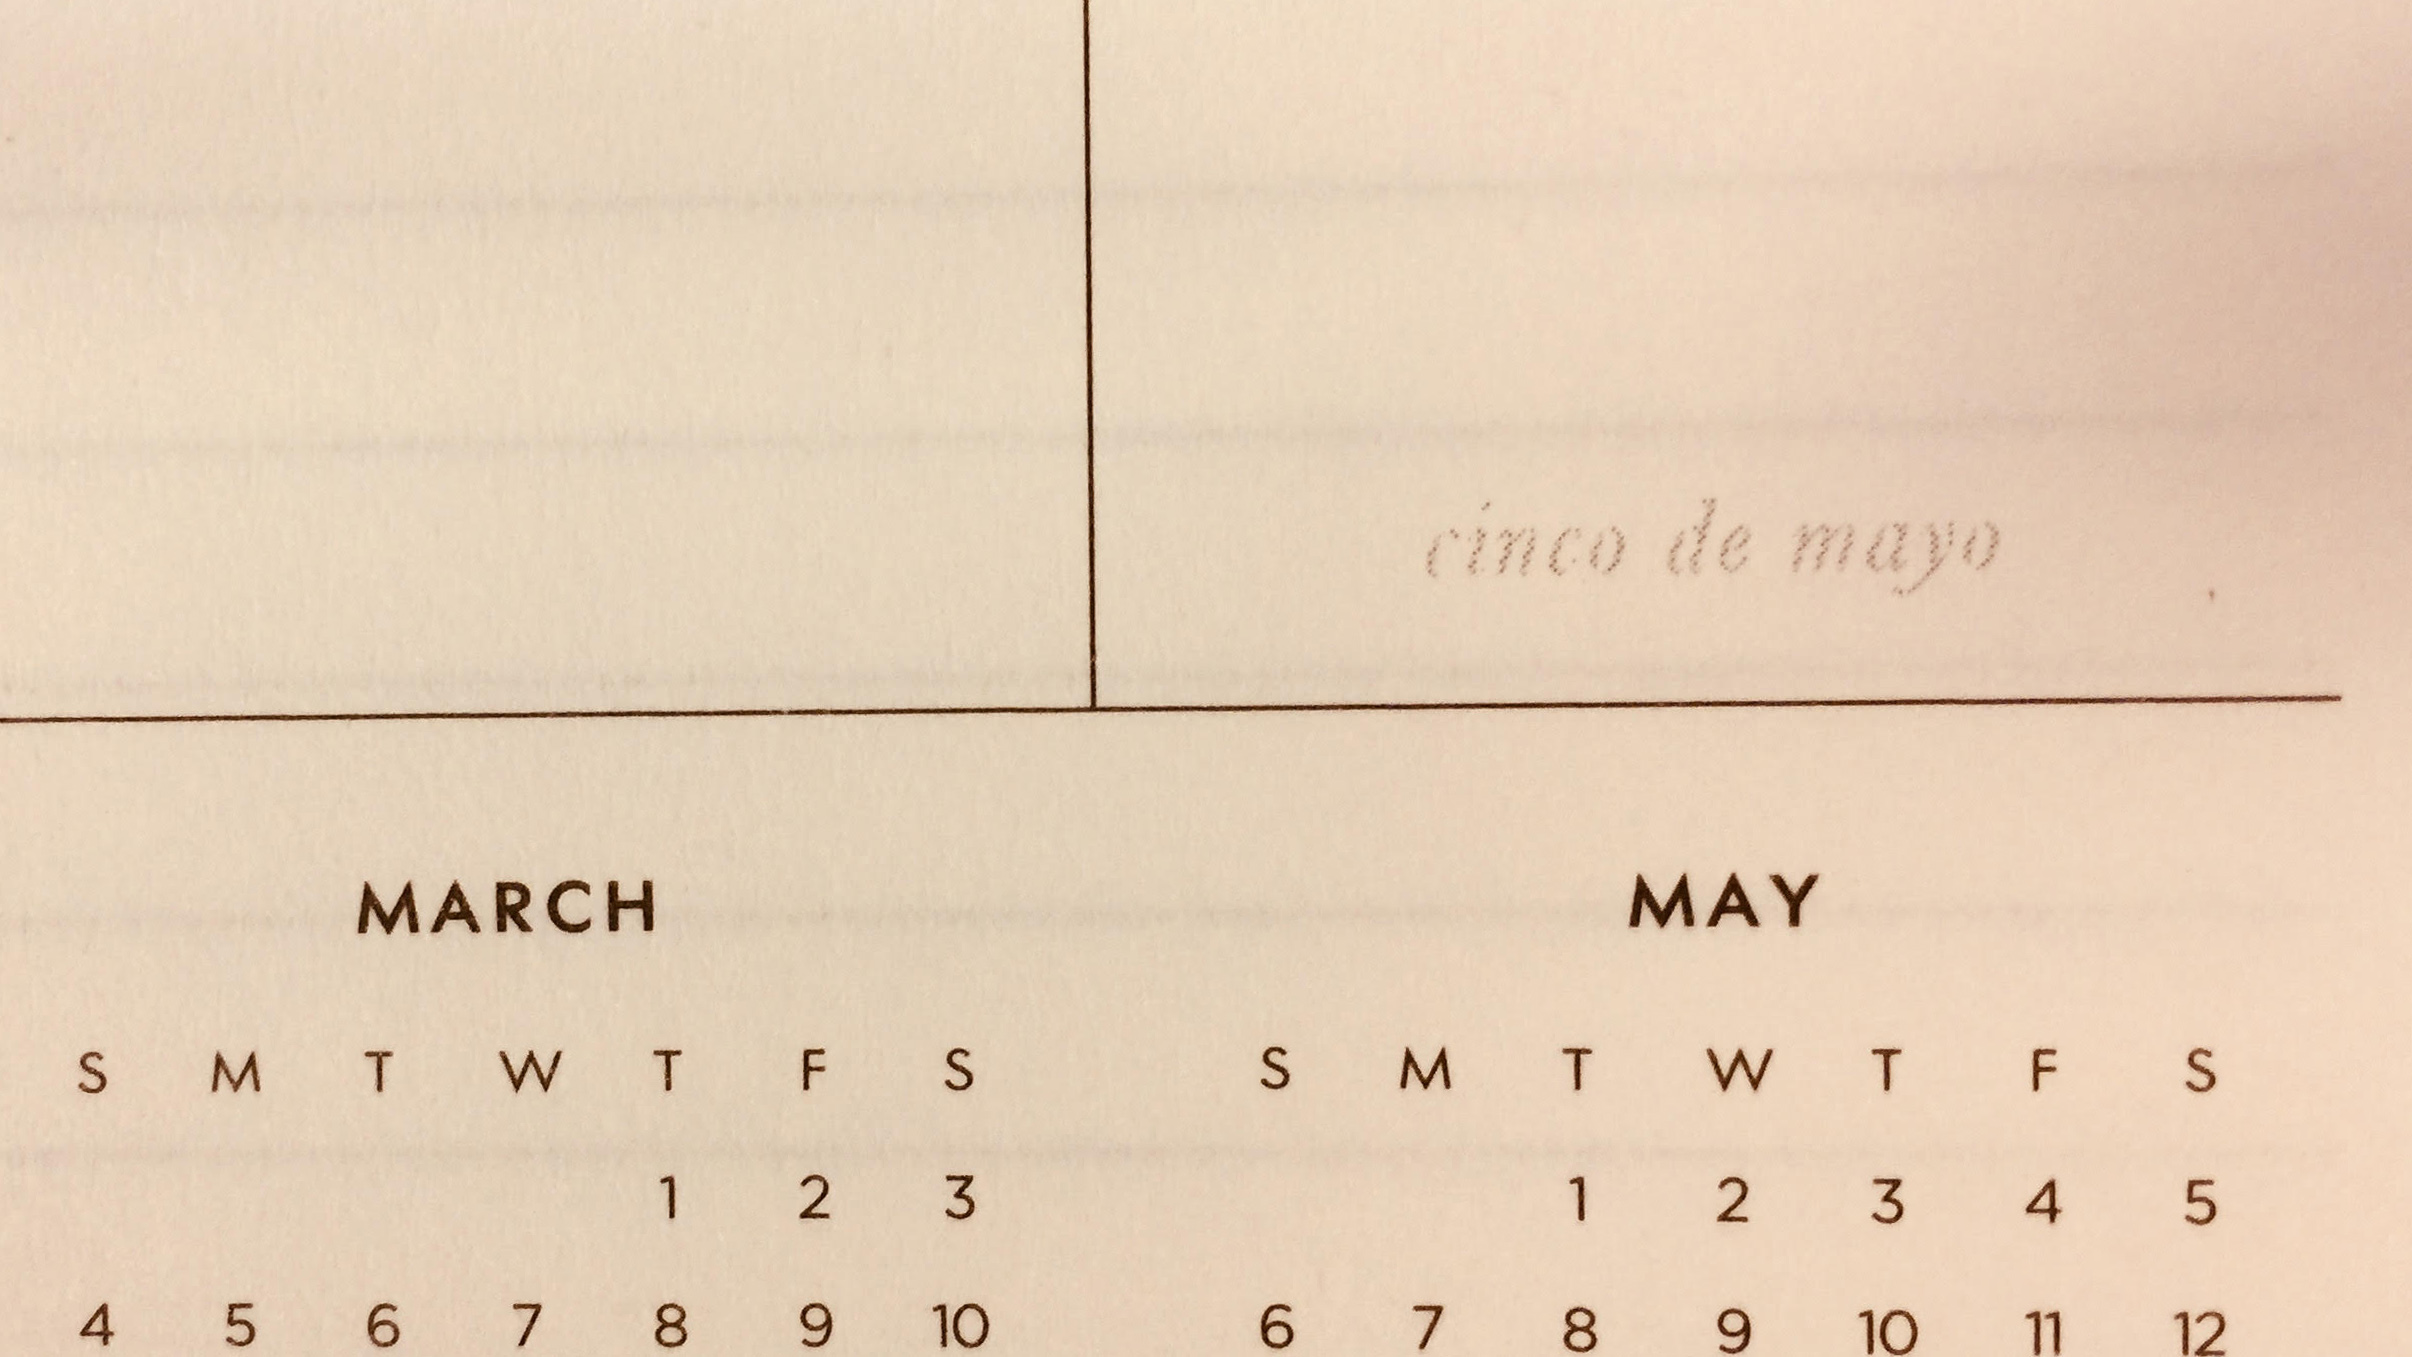 Photo of page from calendar